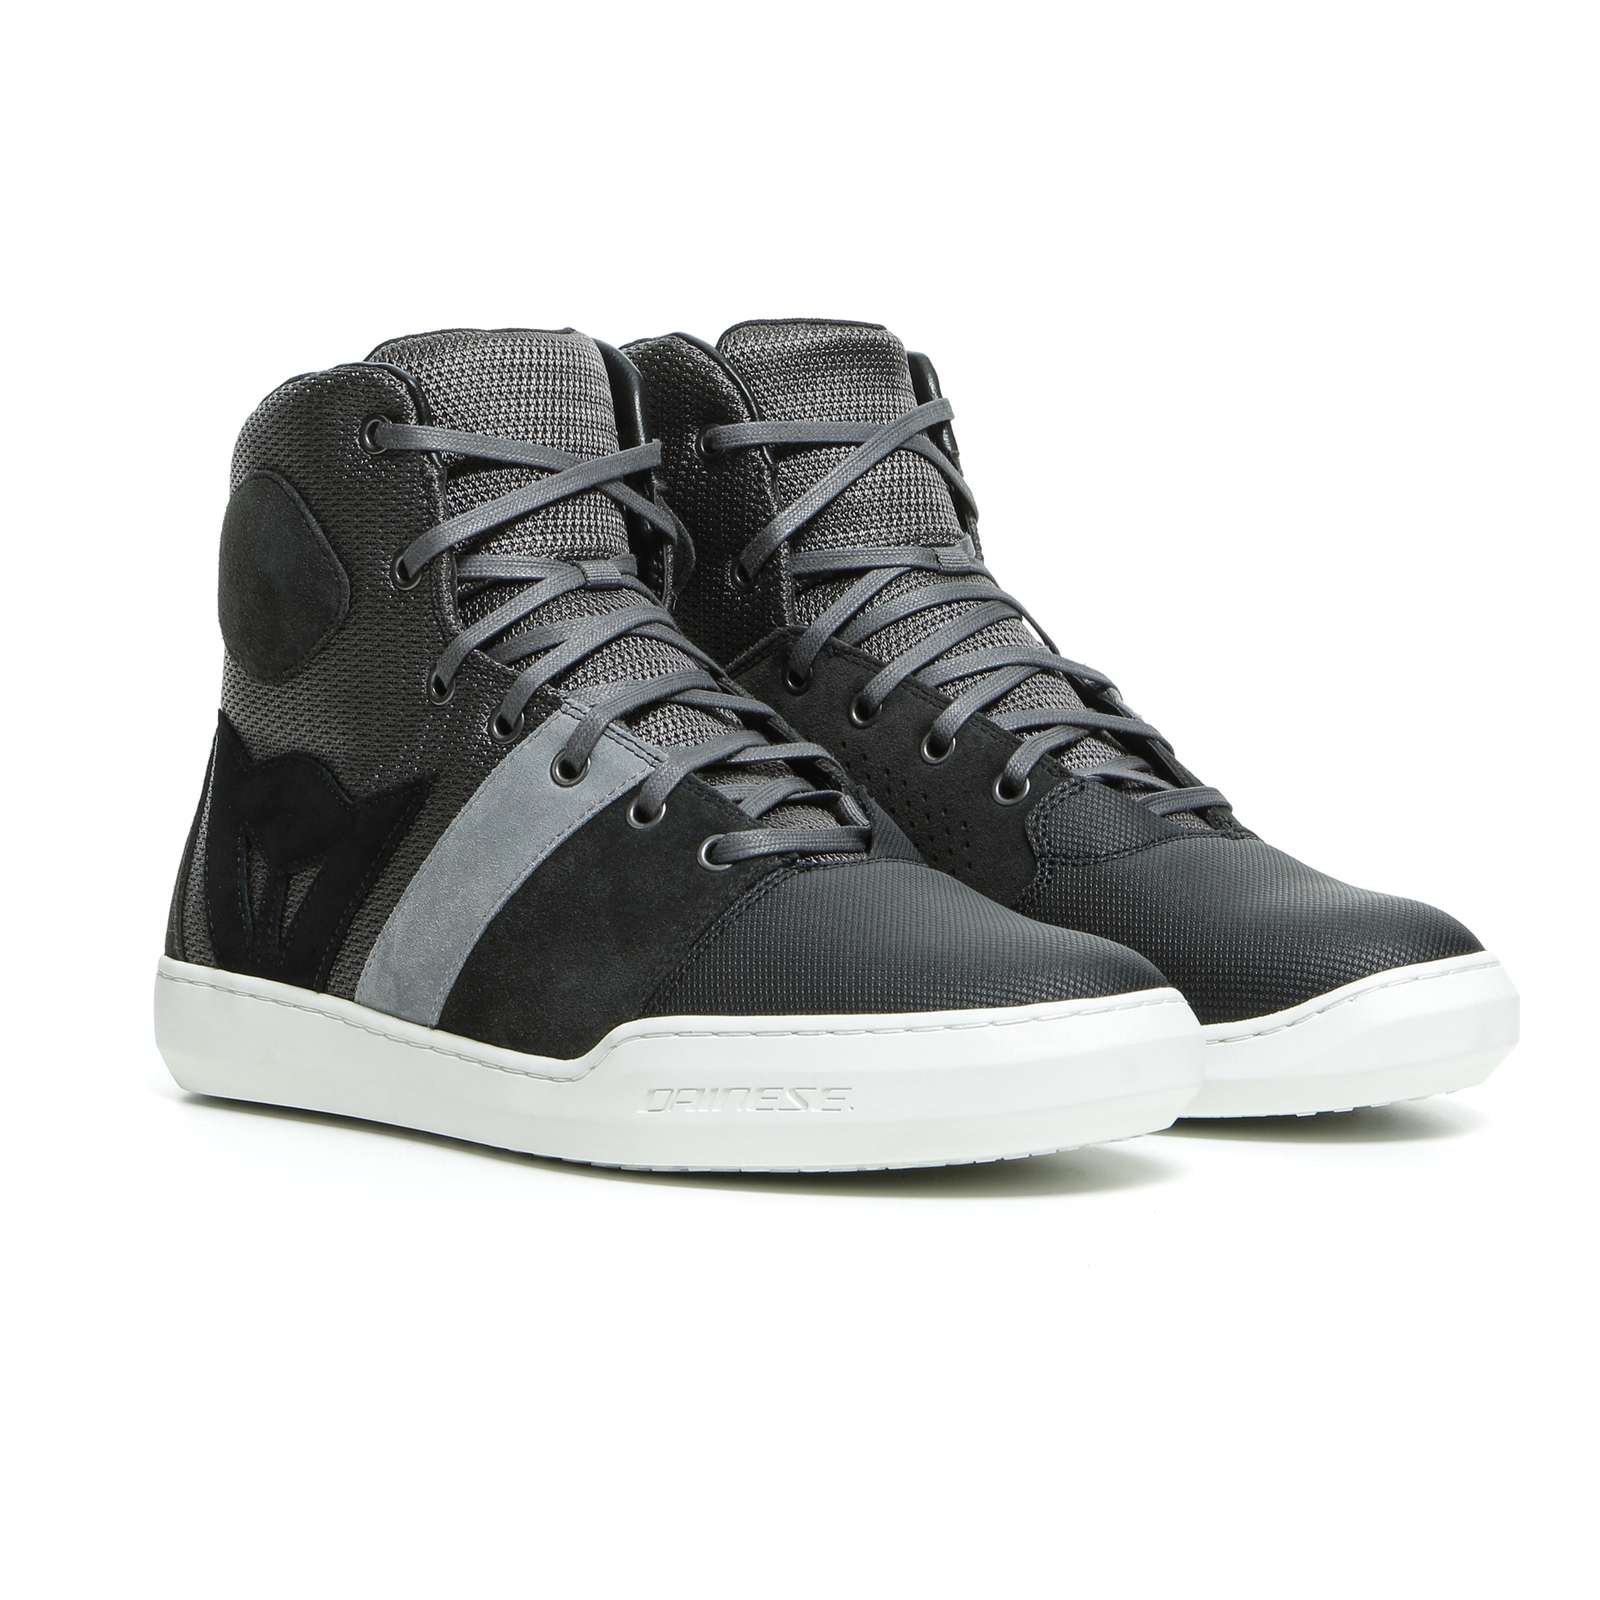 DAINESE YORK AIR SHOES DARK-CARBON/ANTHRACITE/41